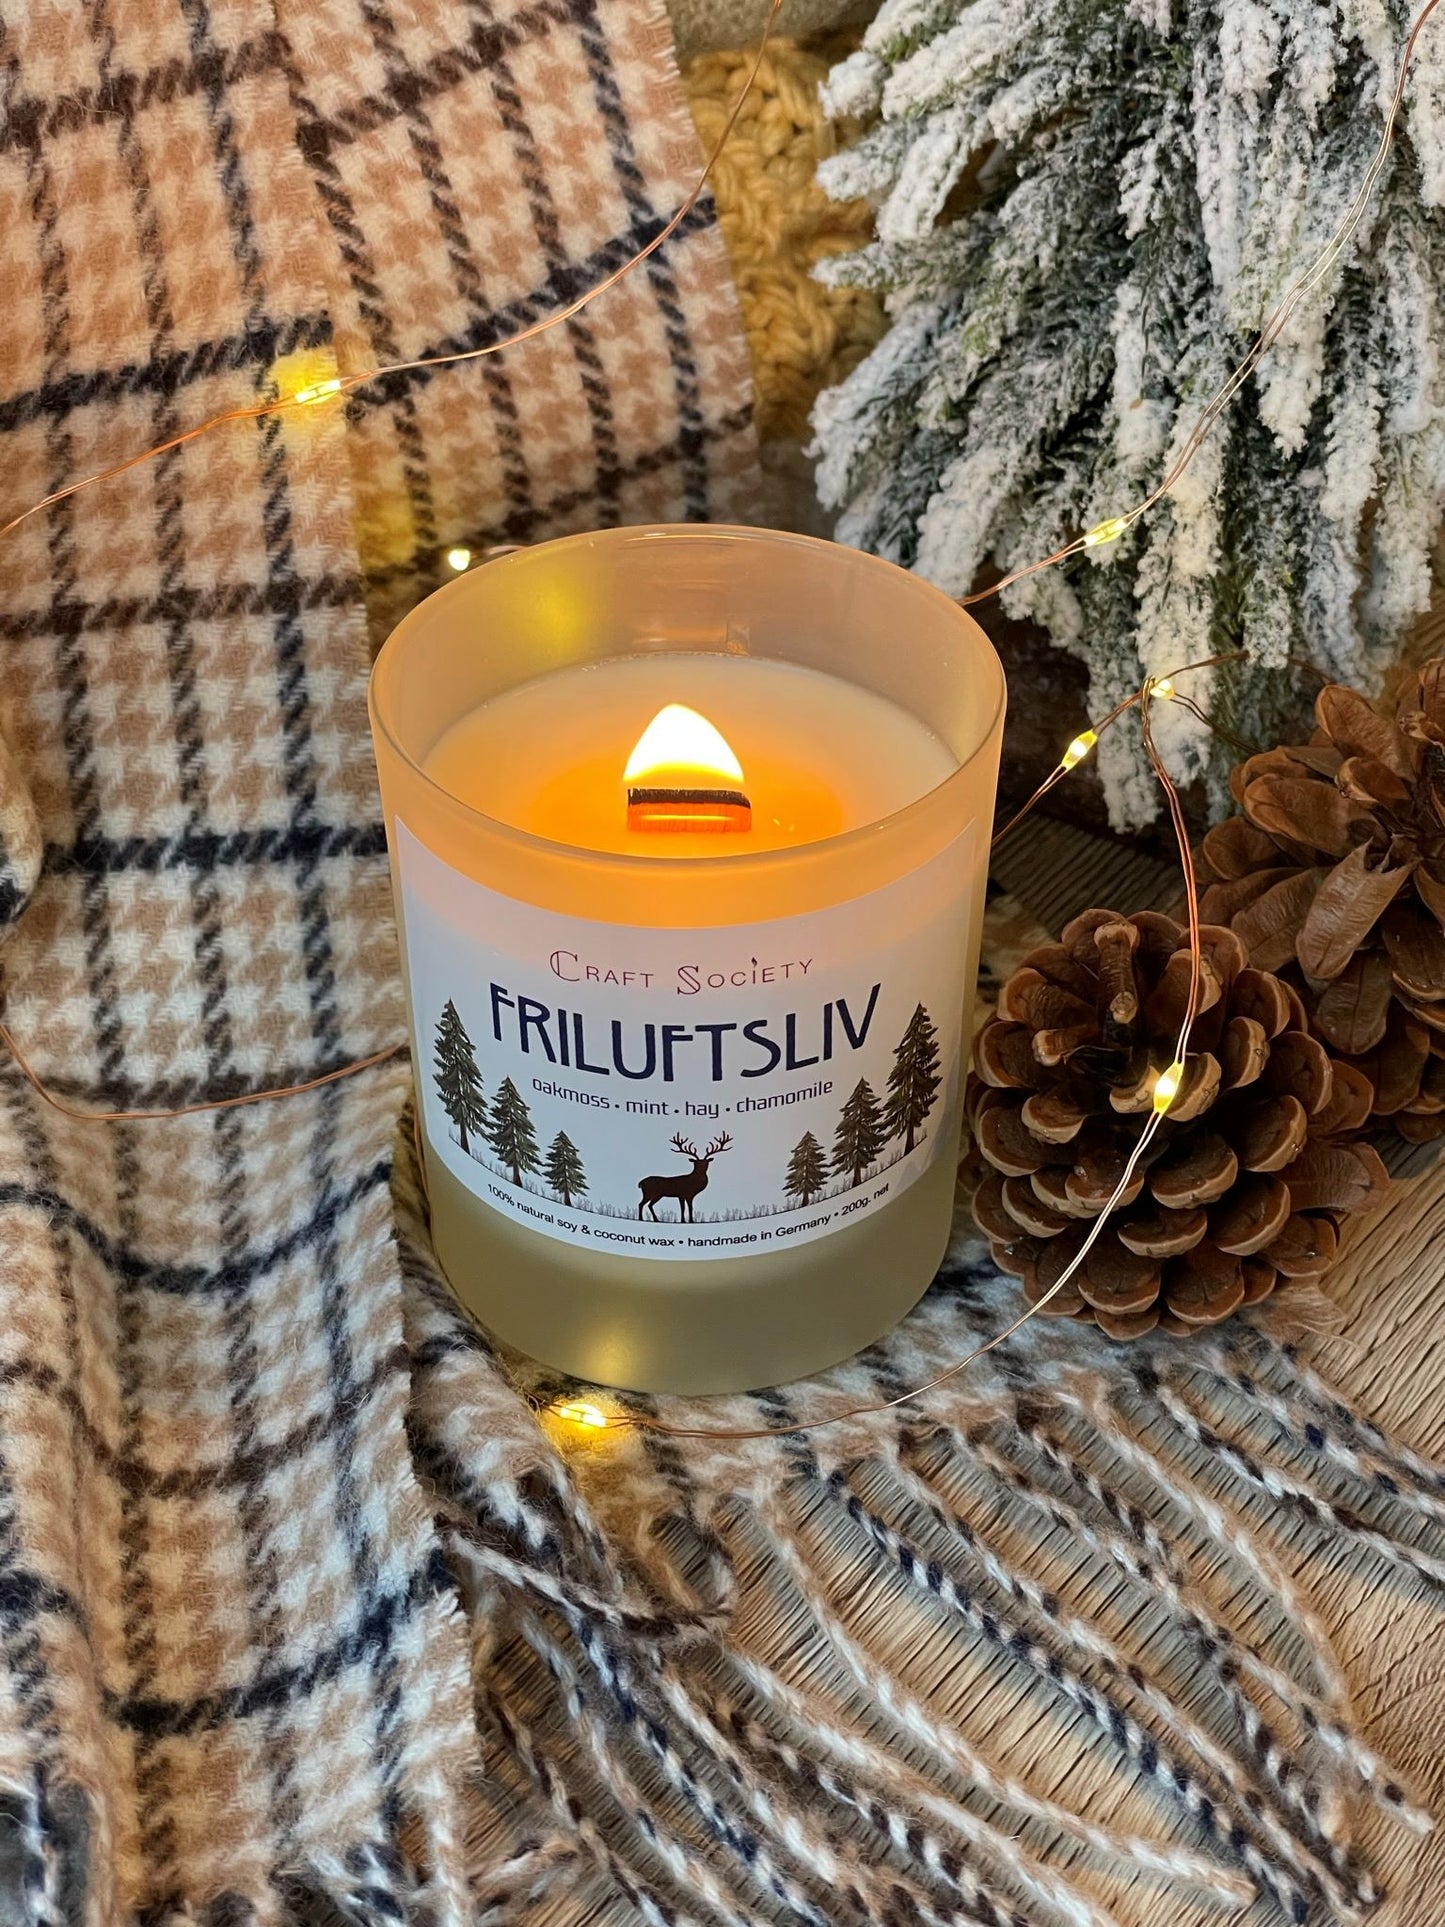 A burning deluxe scented candle on a decorated background with pine cones